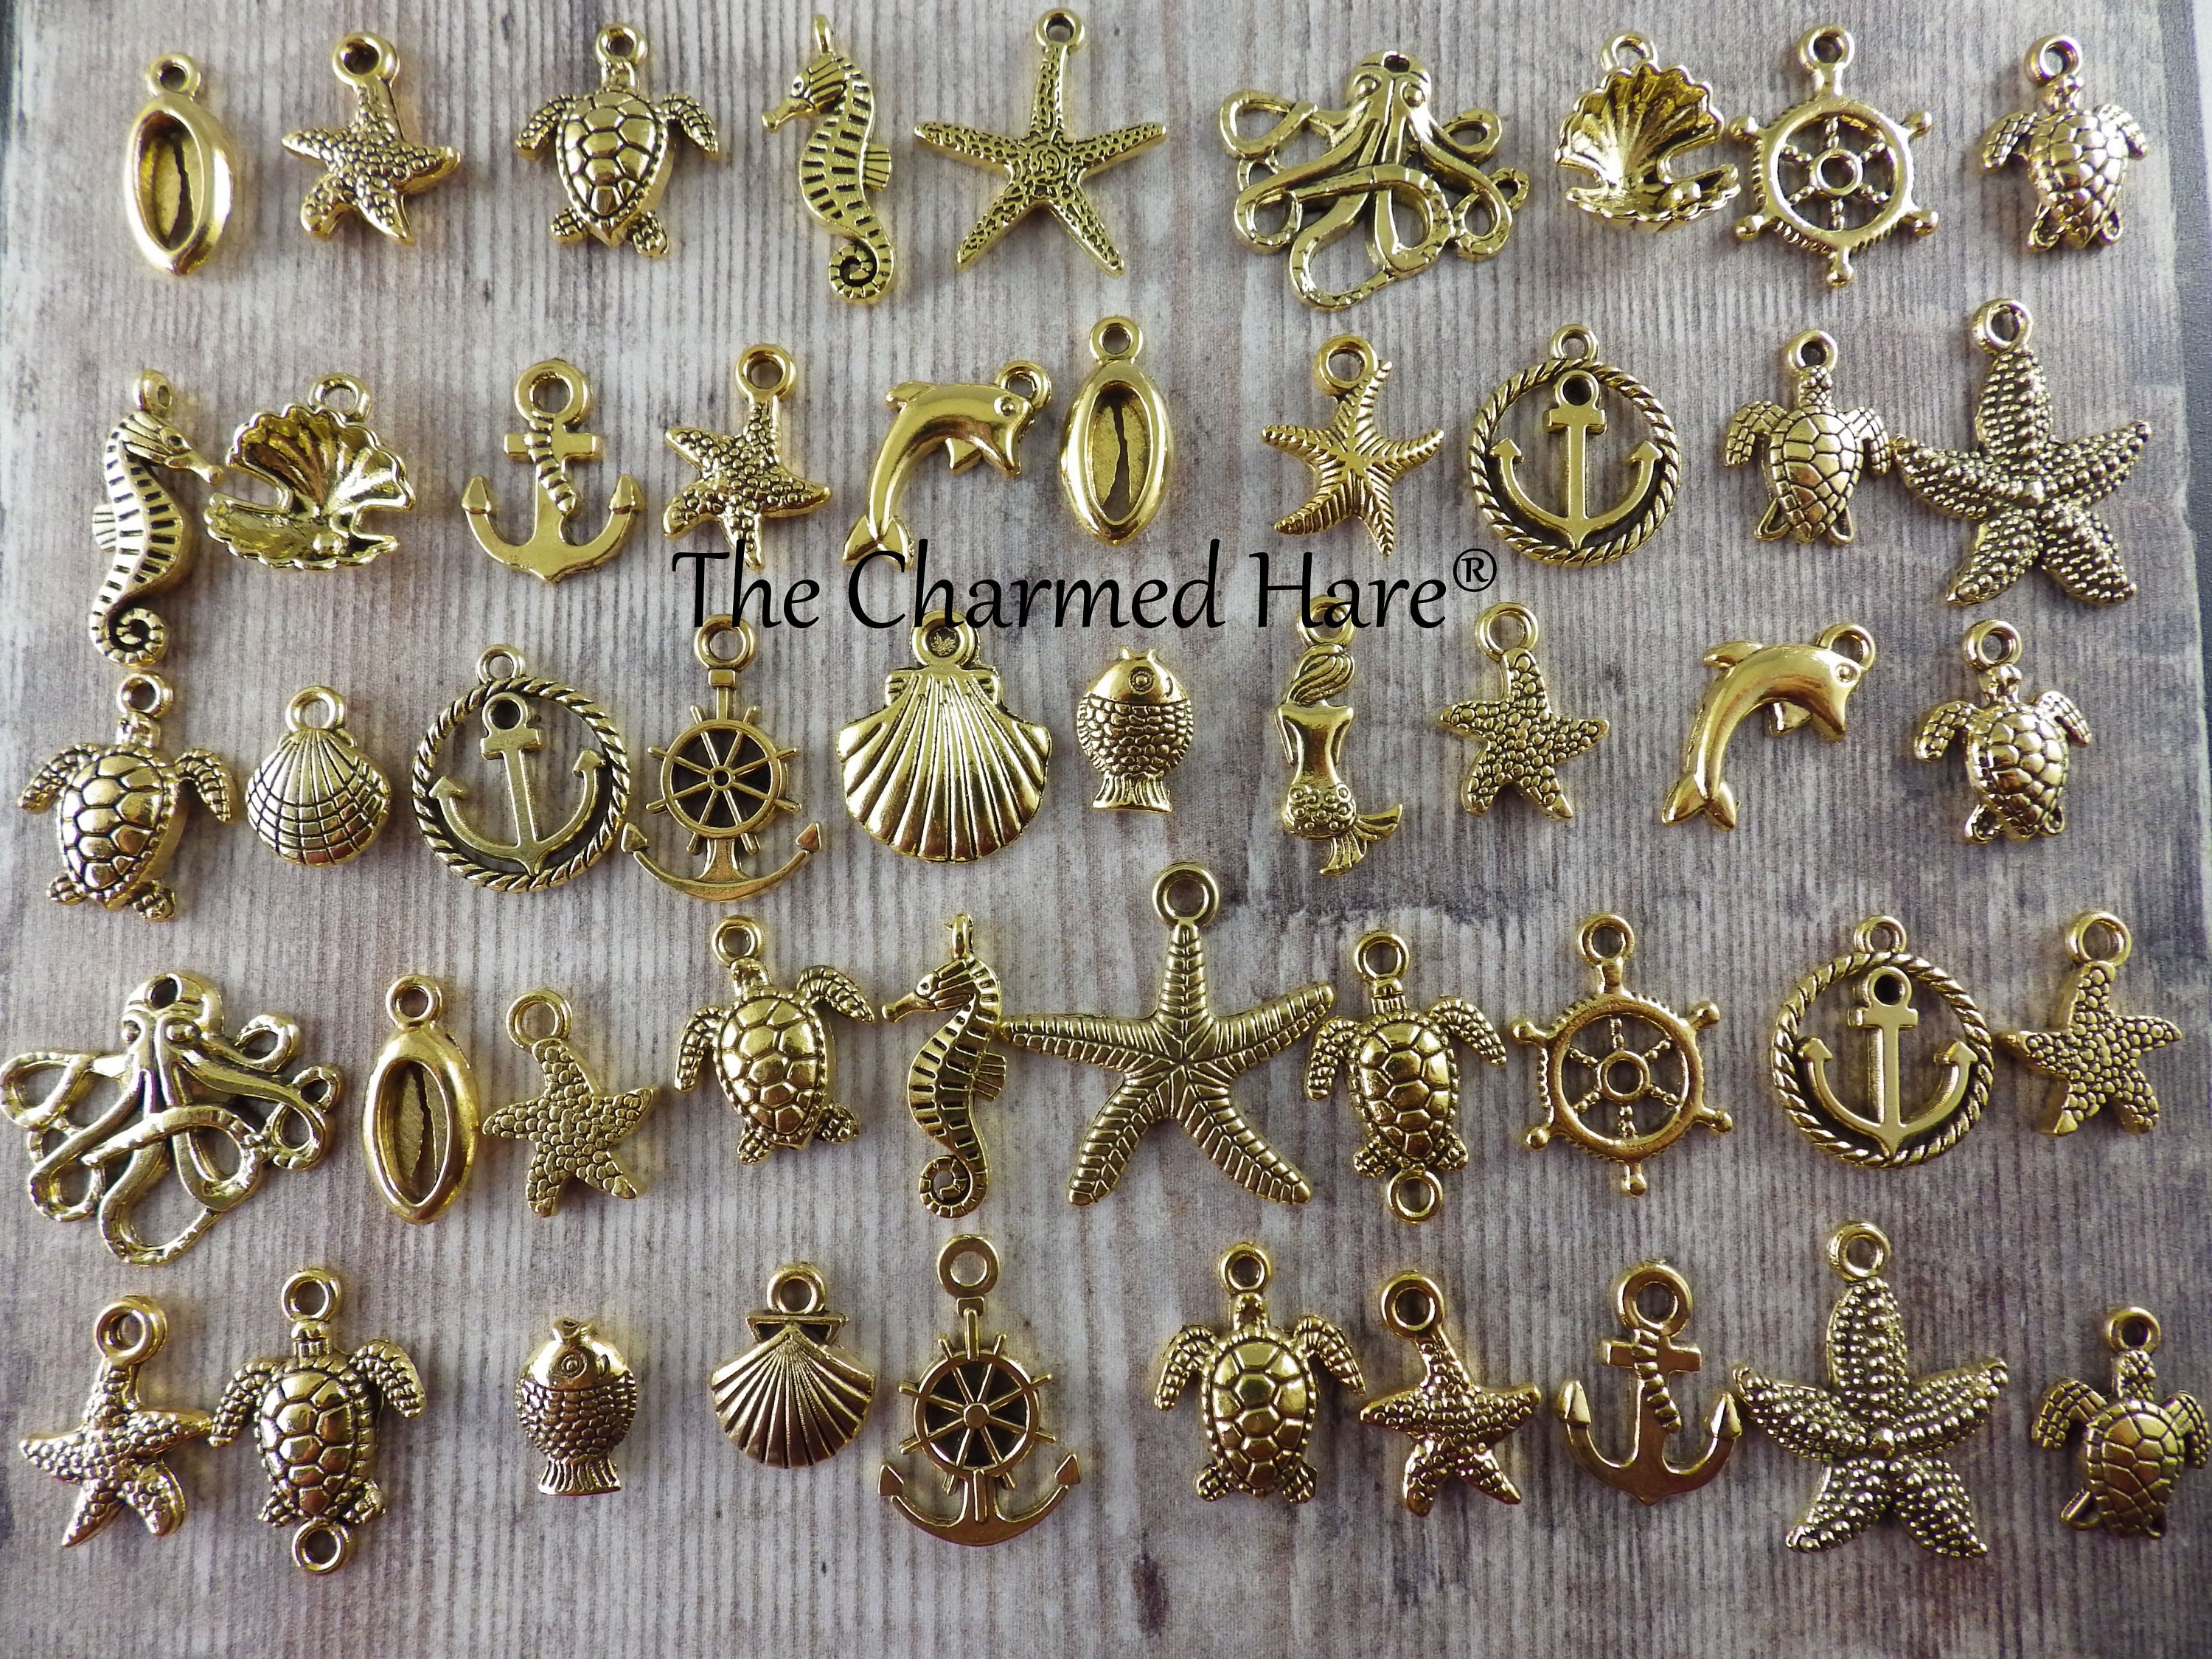 Bulk 100 Assorted Antique Gold Charms, Mixed Charms Jewelry Charms